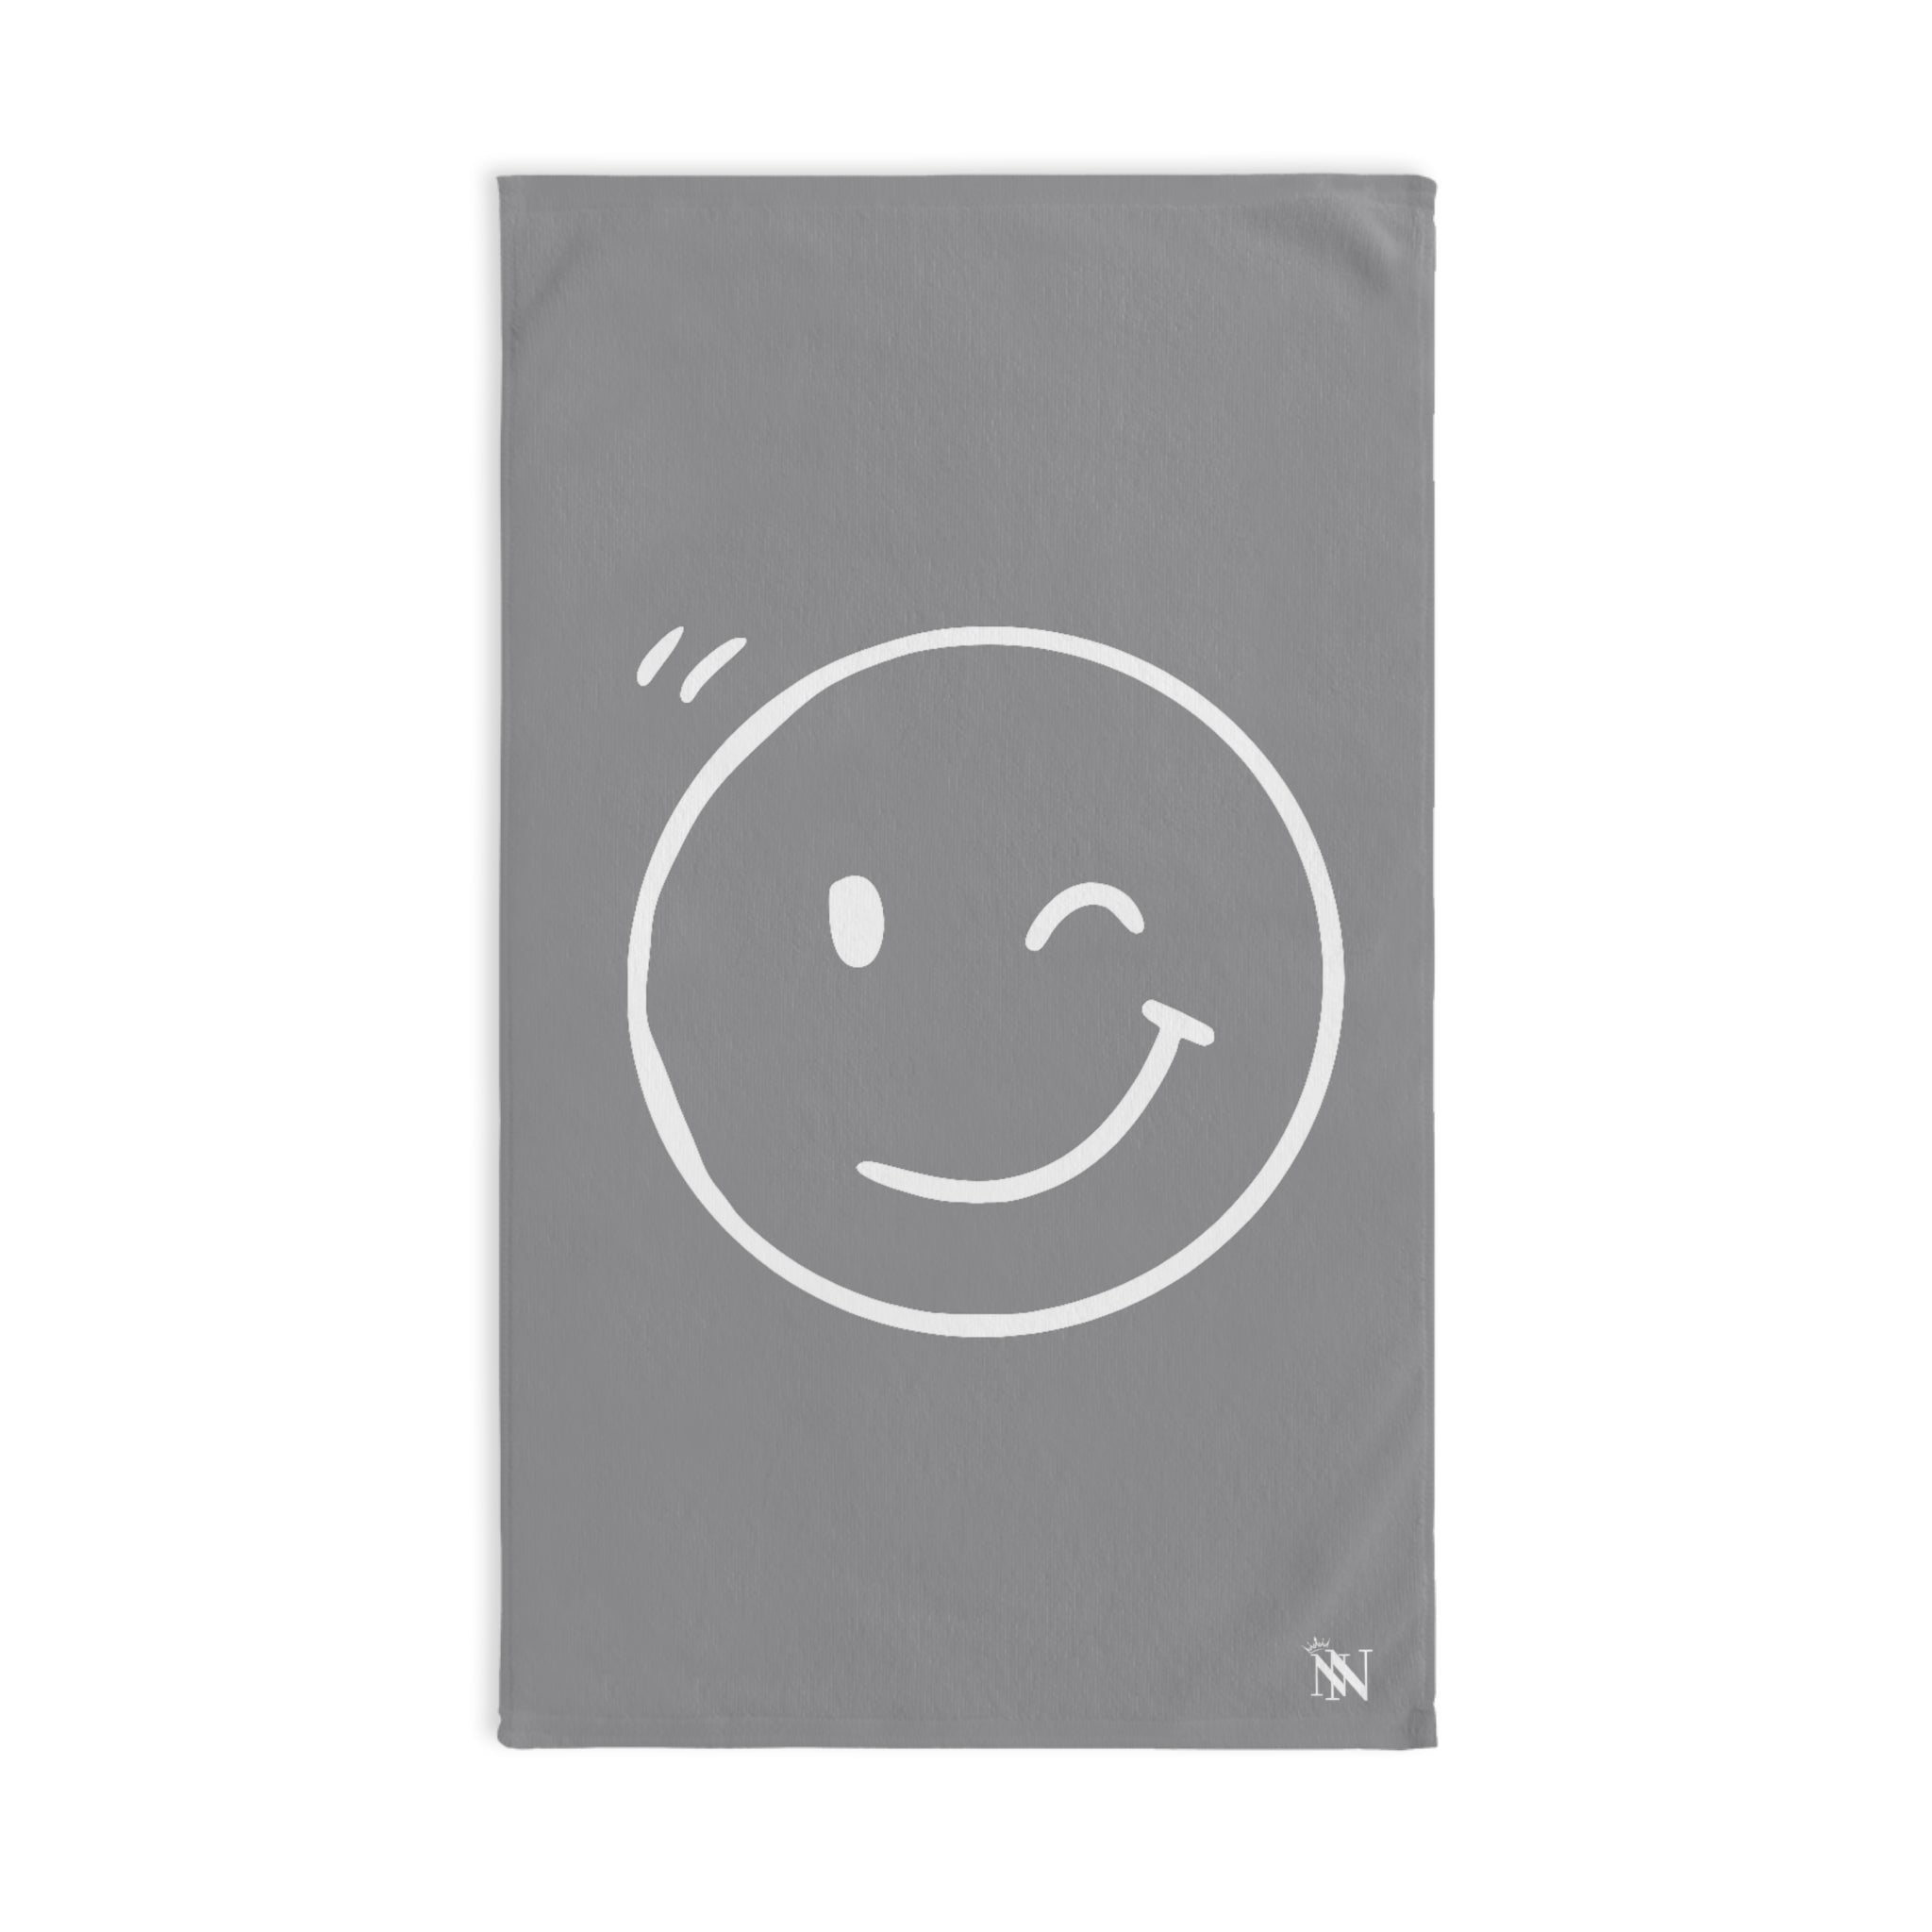 Emoji  Wink  Grey | Anniversary Wedding, Christmas, Valentines Day, Birthday Gifts for Him, Her, Romantic Gifts for Wife, Girlfriend, Couples Gifts for Boyfriend, Husband NECTAR NAPKINS